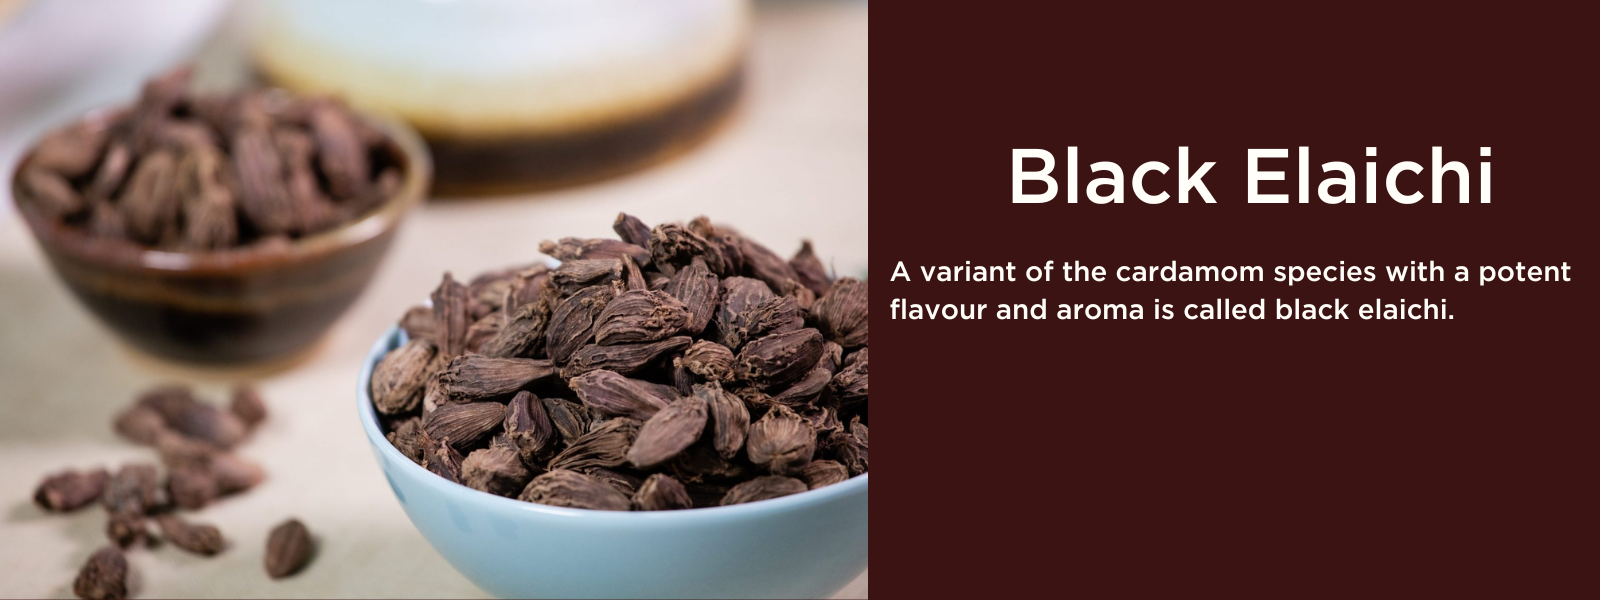 Black Elaichi - Health Benefits, Uses and Important Facts